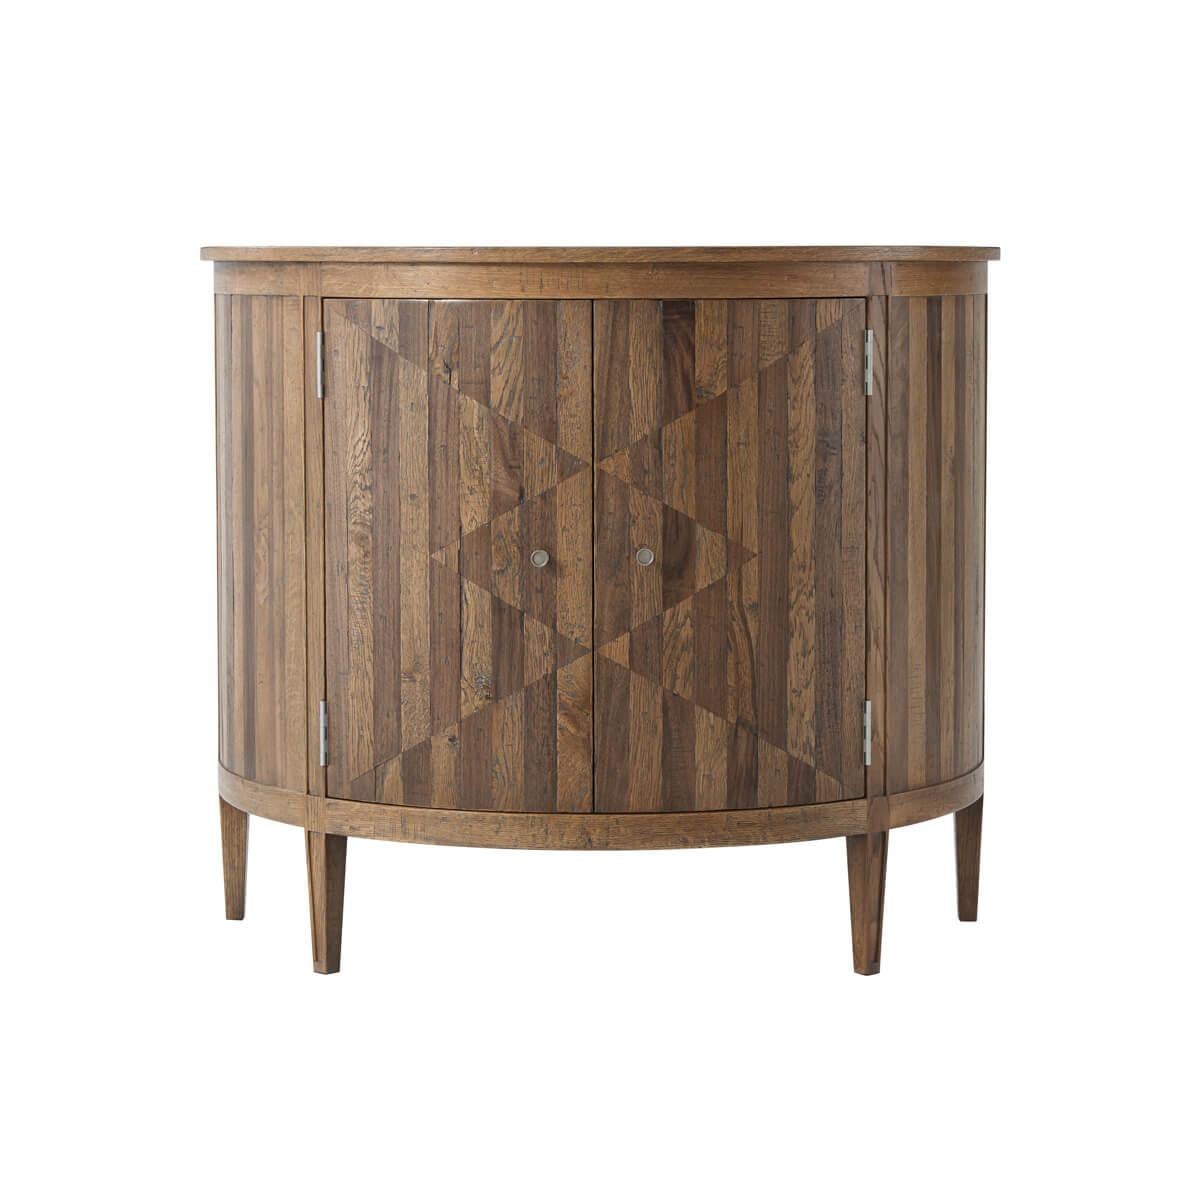 A half-round cabinet with a sunburst inlaid top, finished a natural oak with geometric parquetry doors in oak and walnut, with an adjustable shelf raised on square tapered legs.

Dimensions: 40